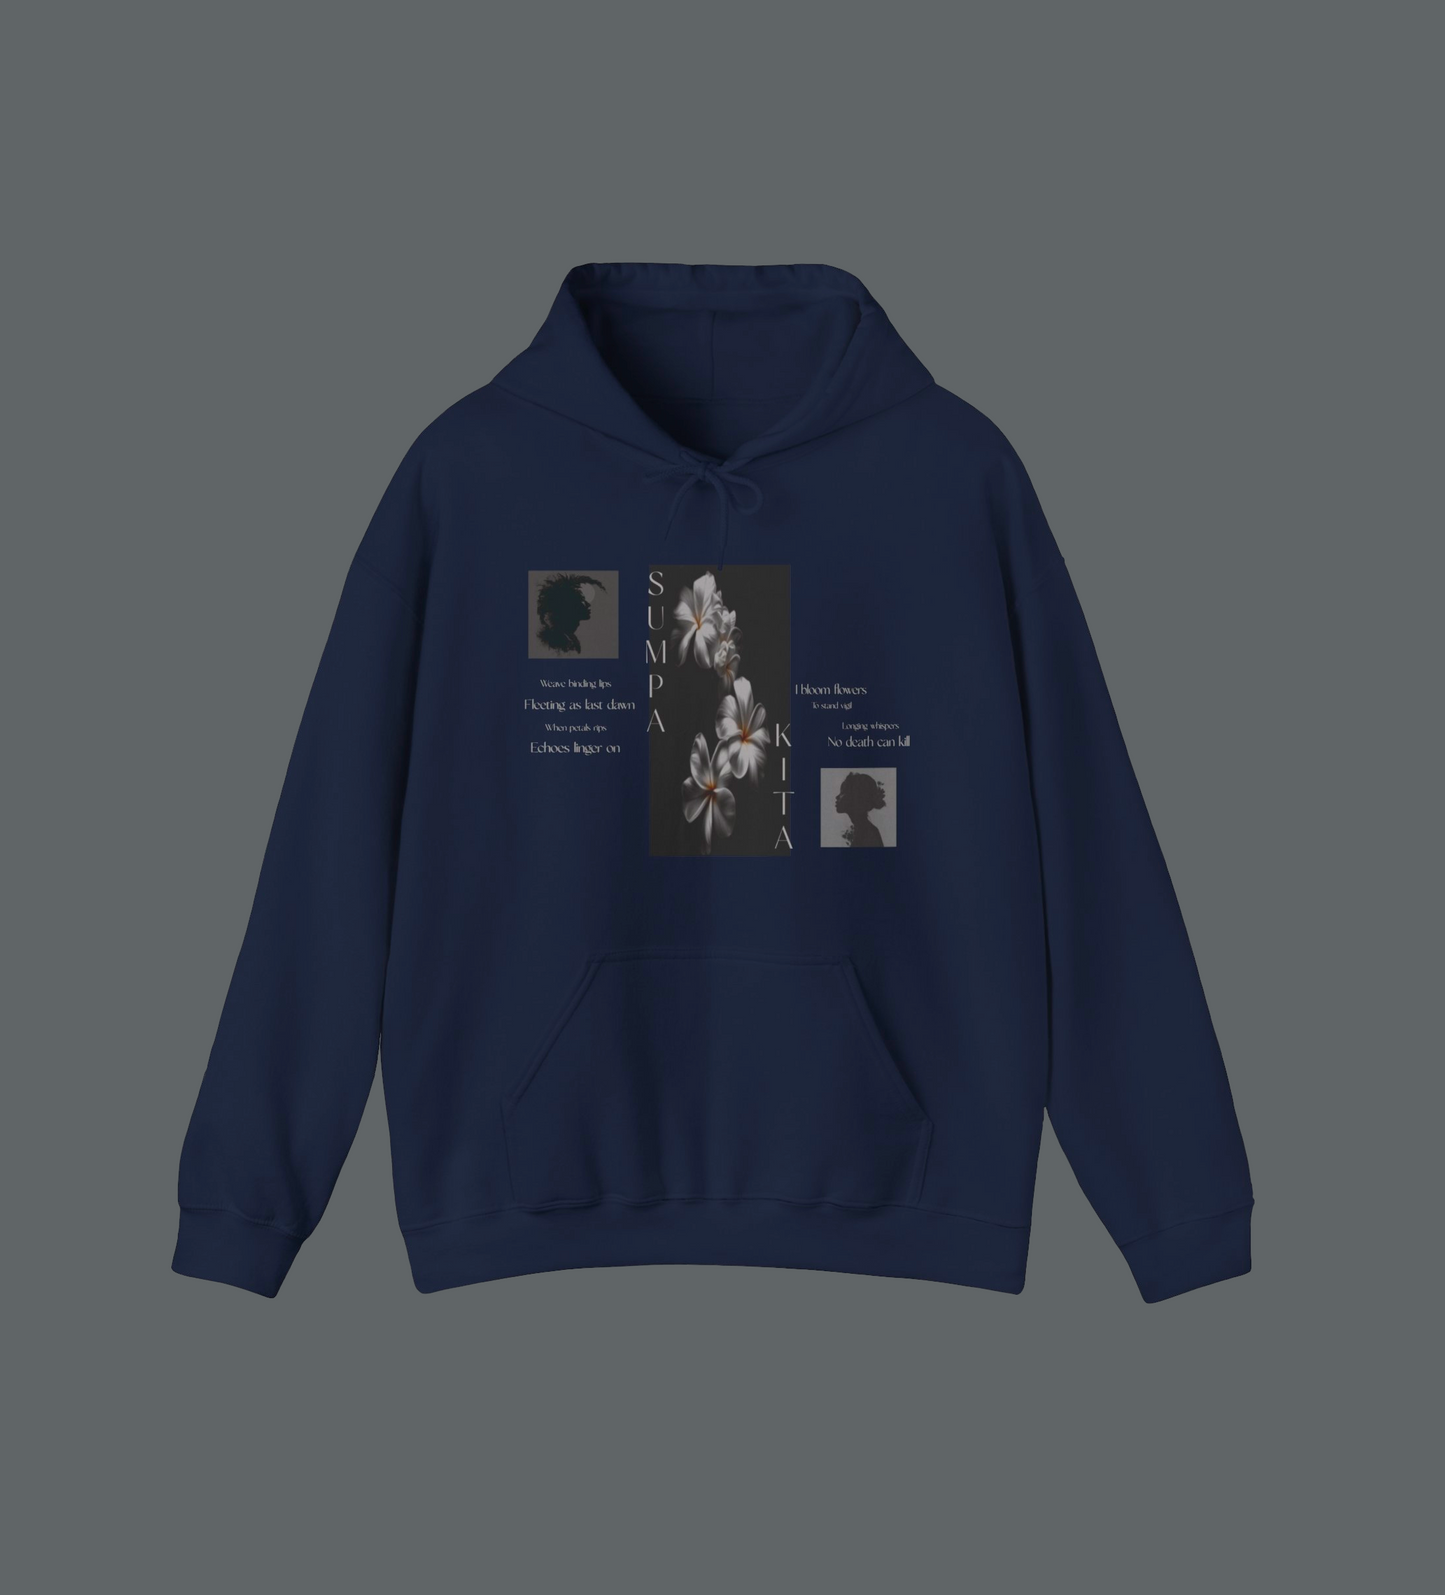 Elevate your style with this Filipino clothing brand, unisex heavy blend cotton and polyester hoodie with spacious kangaroo pocket. How long can a promise last? An artistic depiction of a floral emblem, Philippines' national flower, sampaguita, featured in this classic hoodie with soft cotton and quality print.